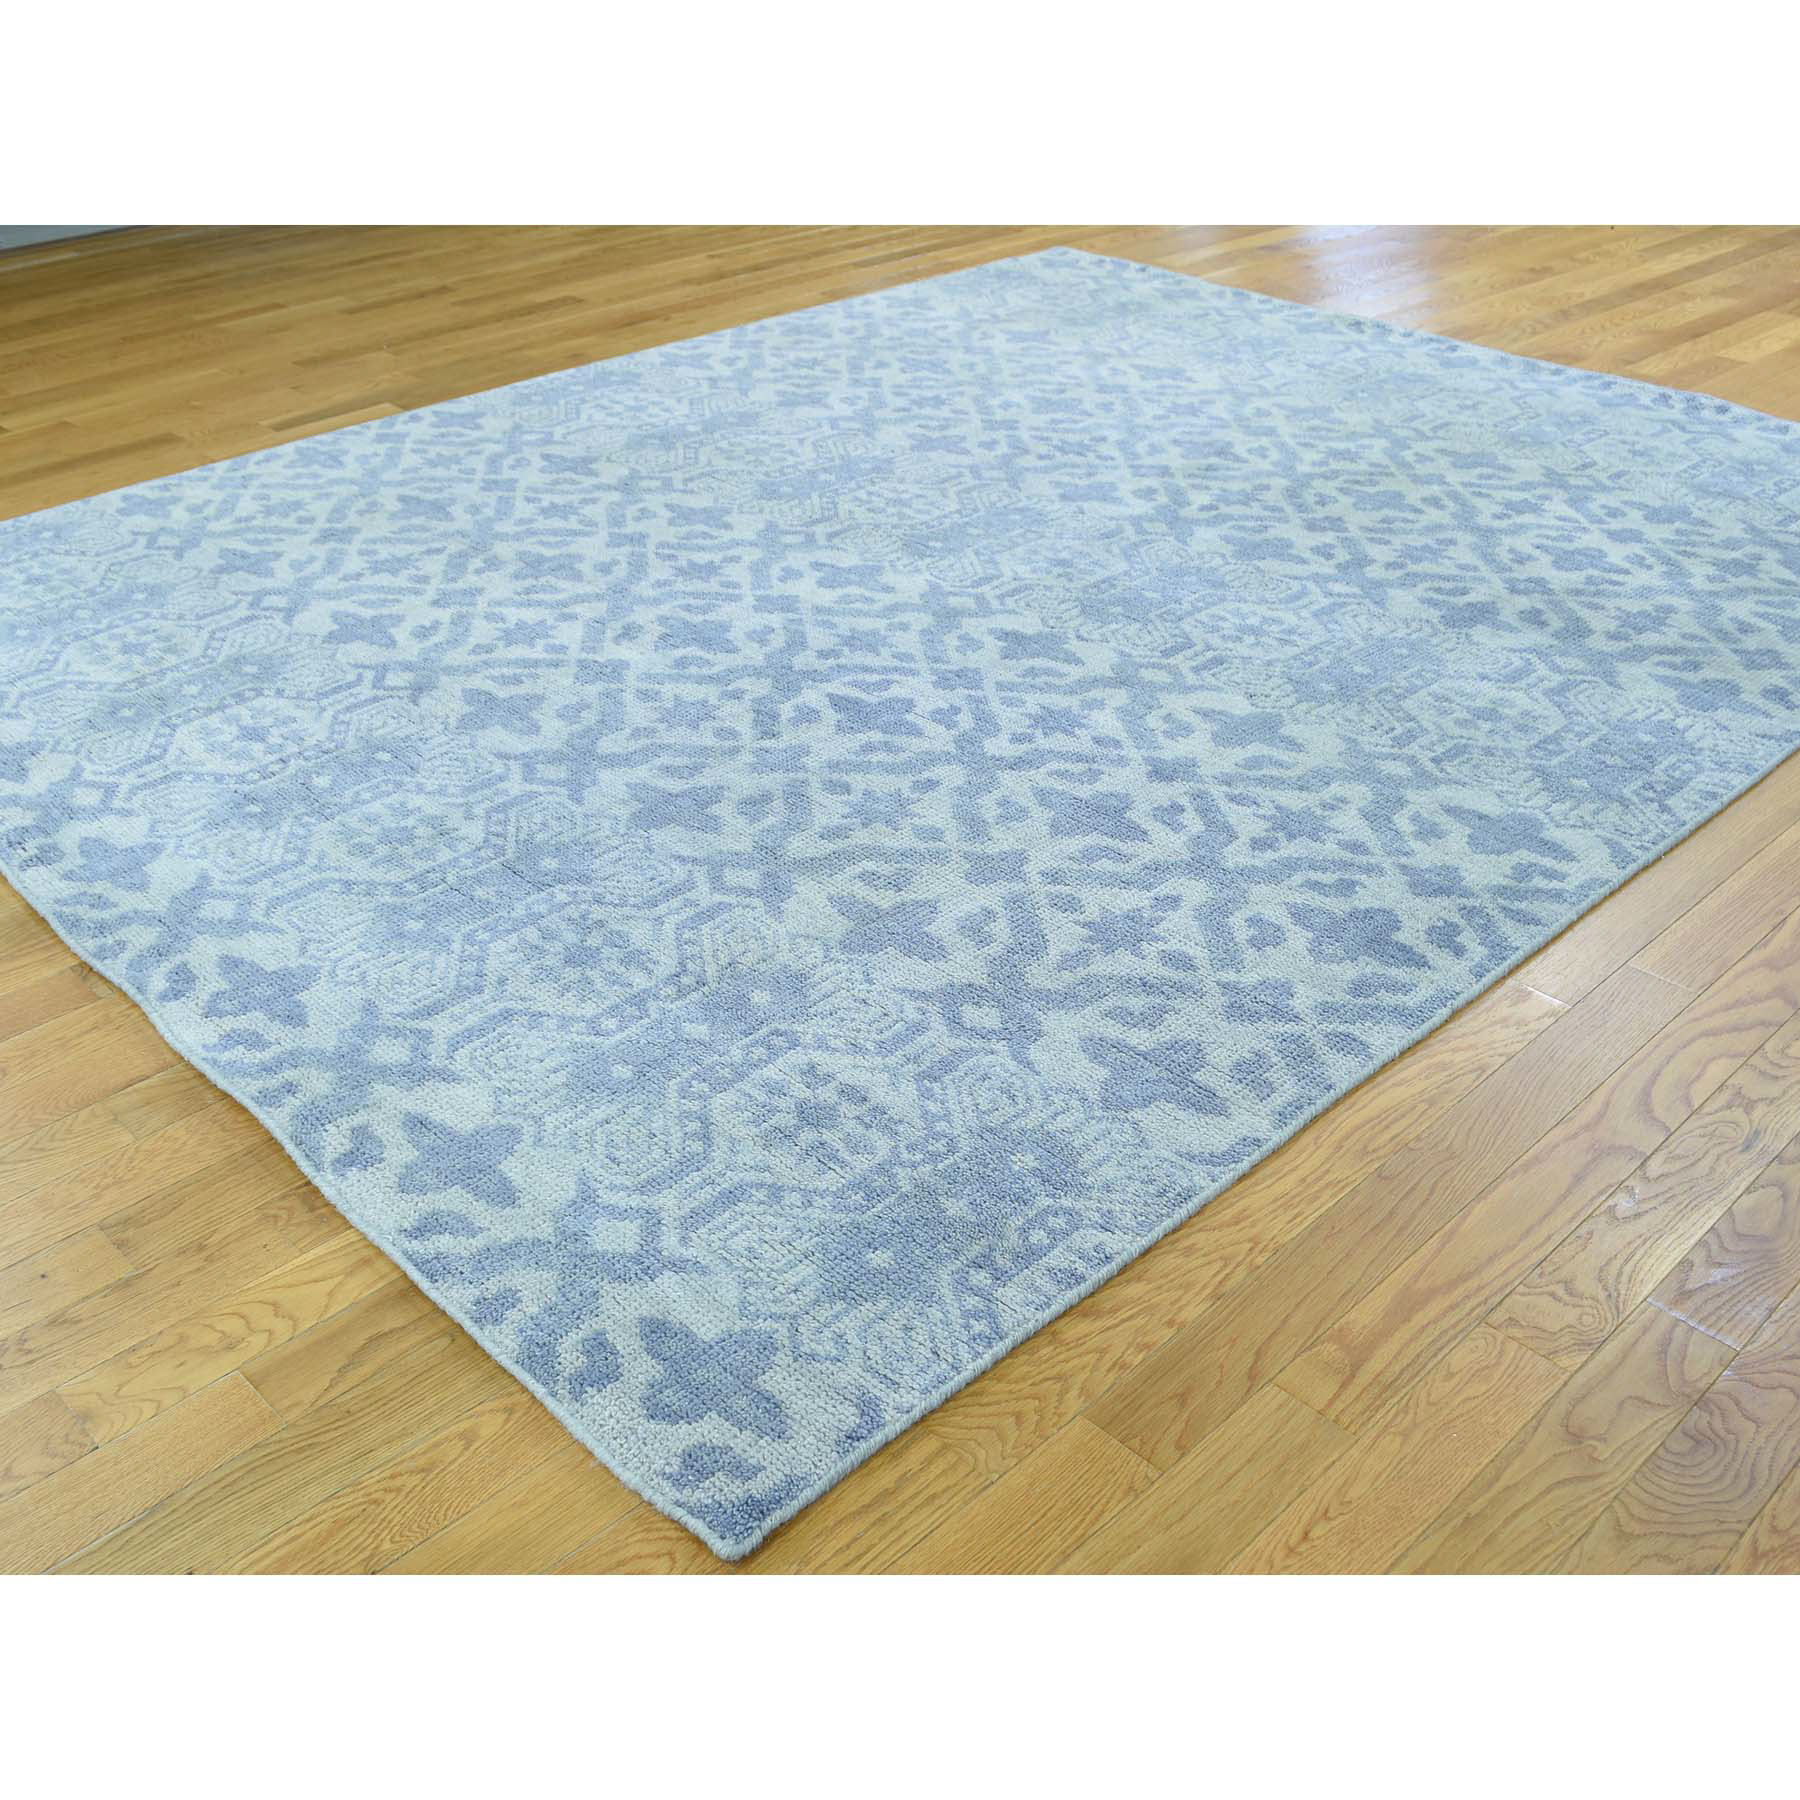 8-1 x10- Pure Wool Hand-Knotted Tone-on-Tone Oriental Rug 